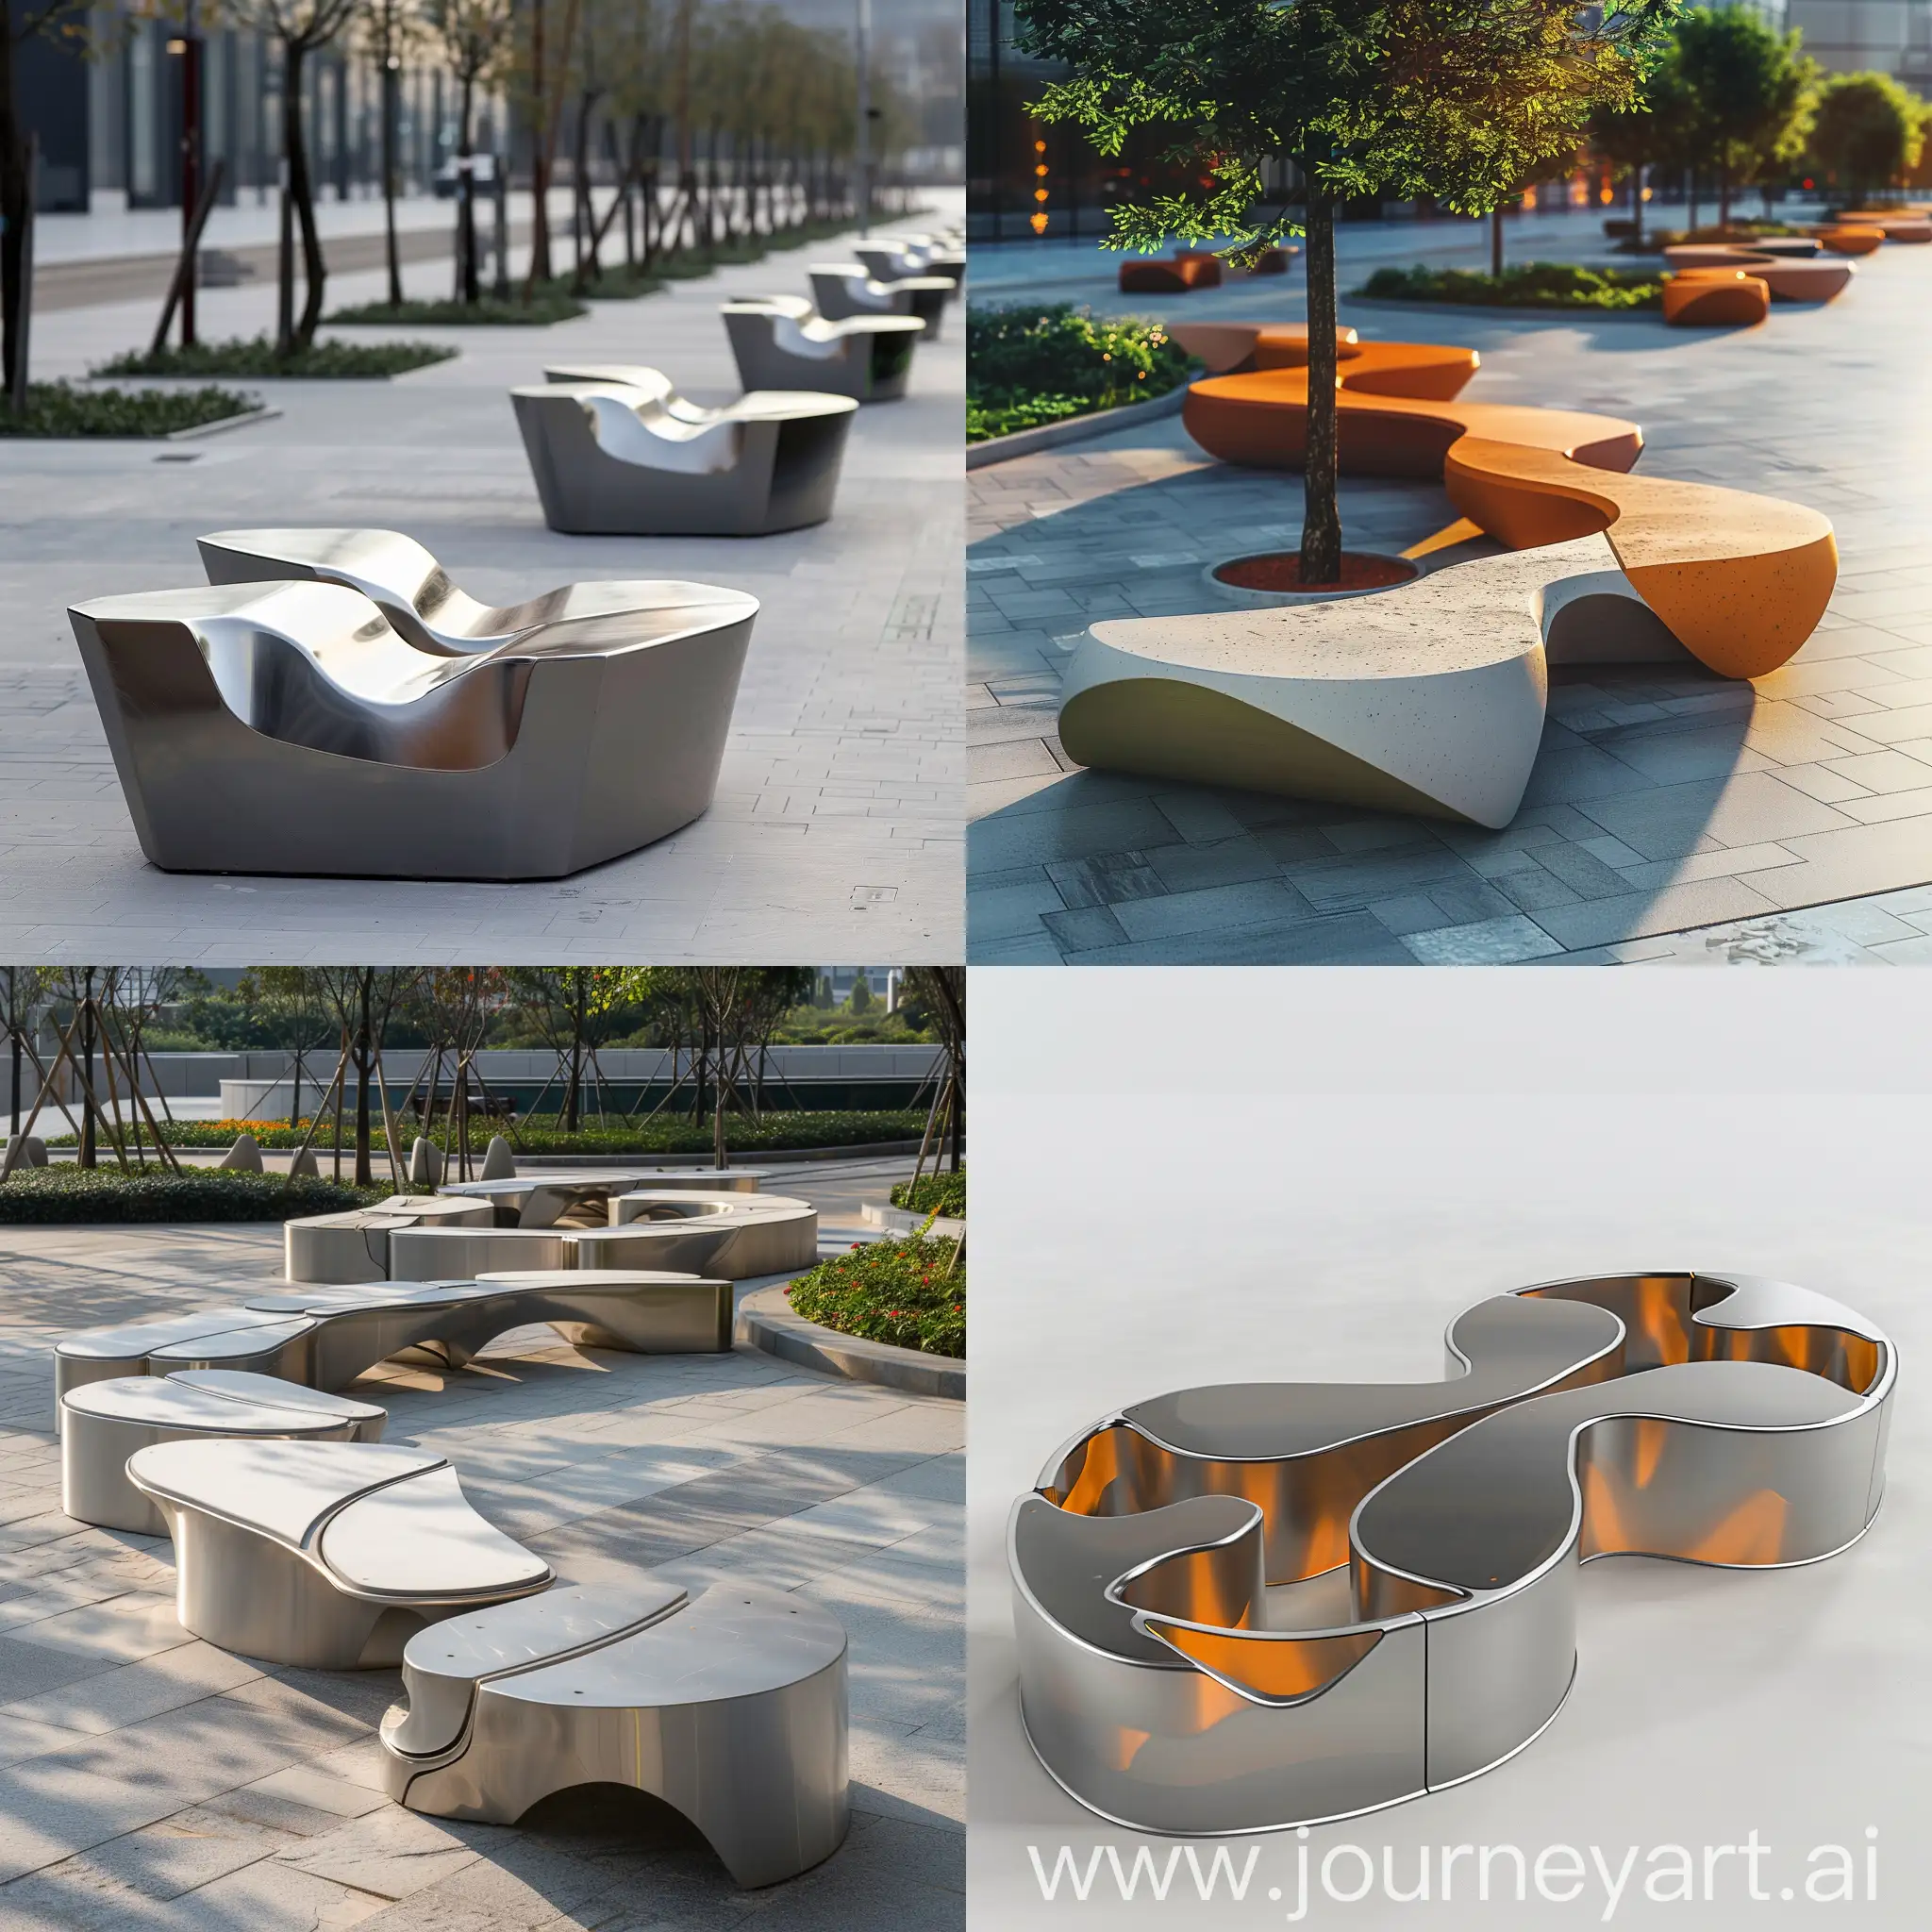 Modular-Seating-Design-for-Urban-Parks-and-Public-Spaces